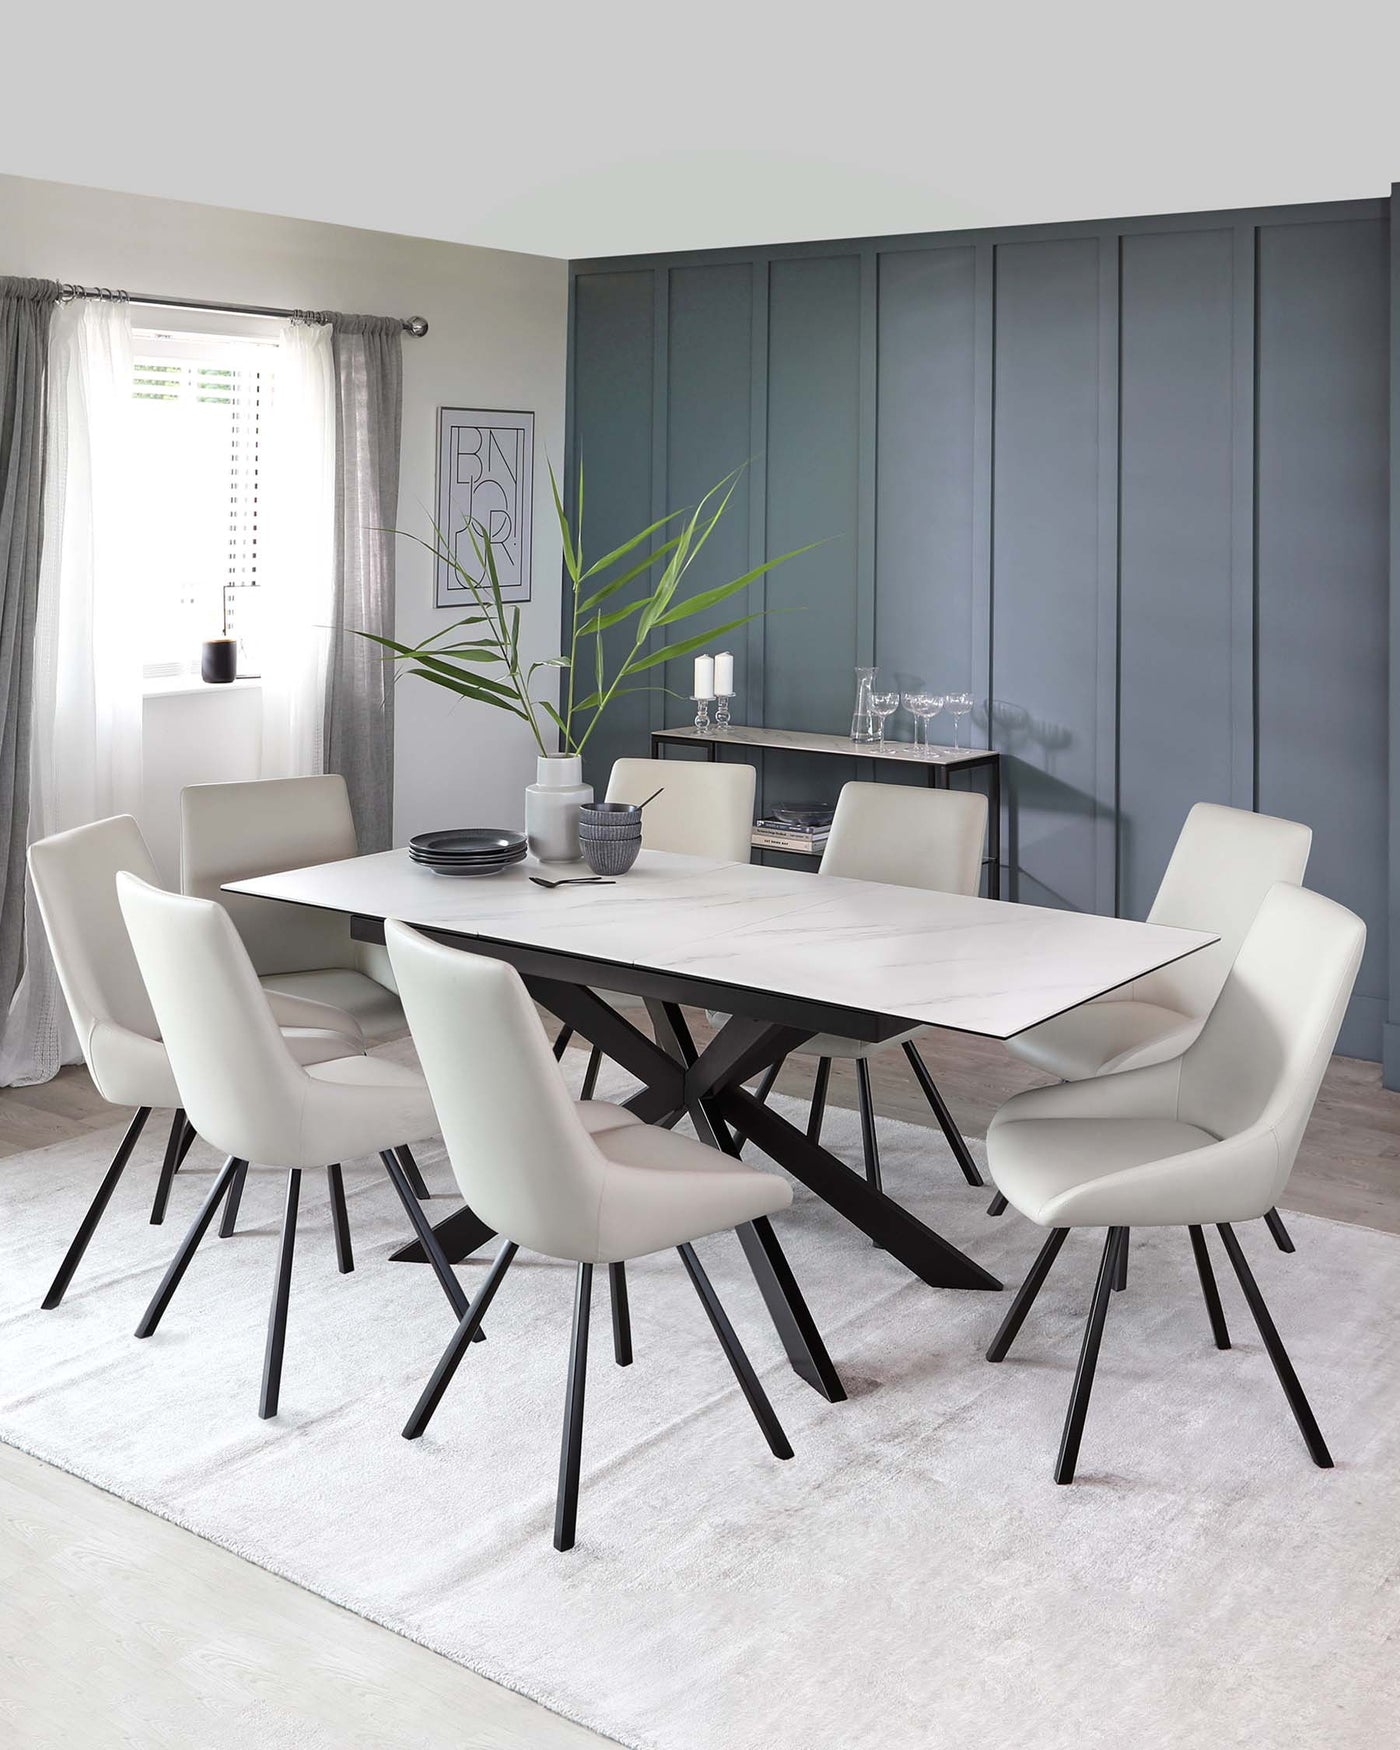 Modern dining room set featuring an oval white marble table with a unique angular black base and six curved, cream-upholstered chairs with slim black legs, arranged on a plain light grey area rug. A sleek black sideboard is in the background.